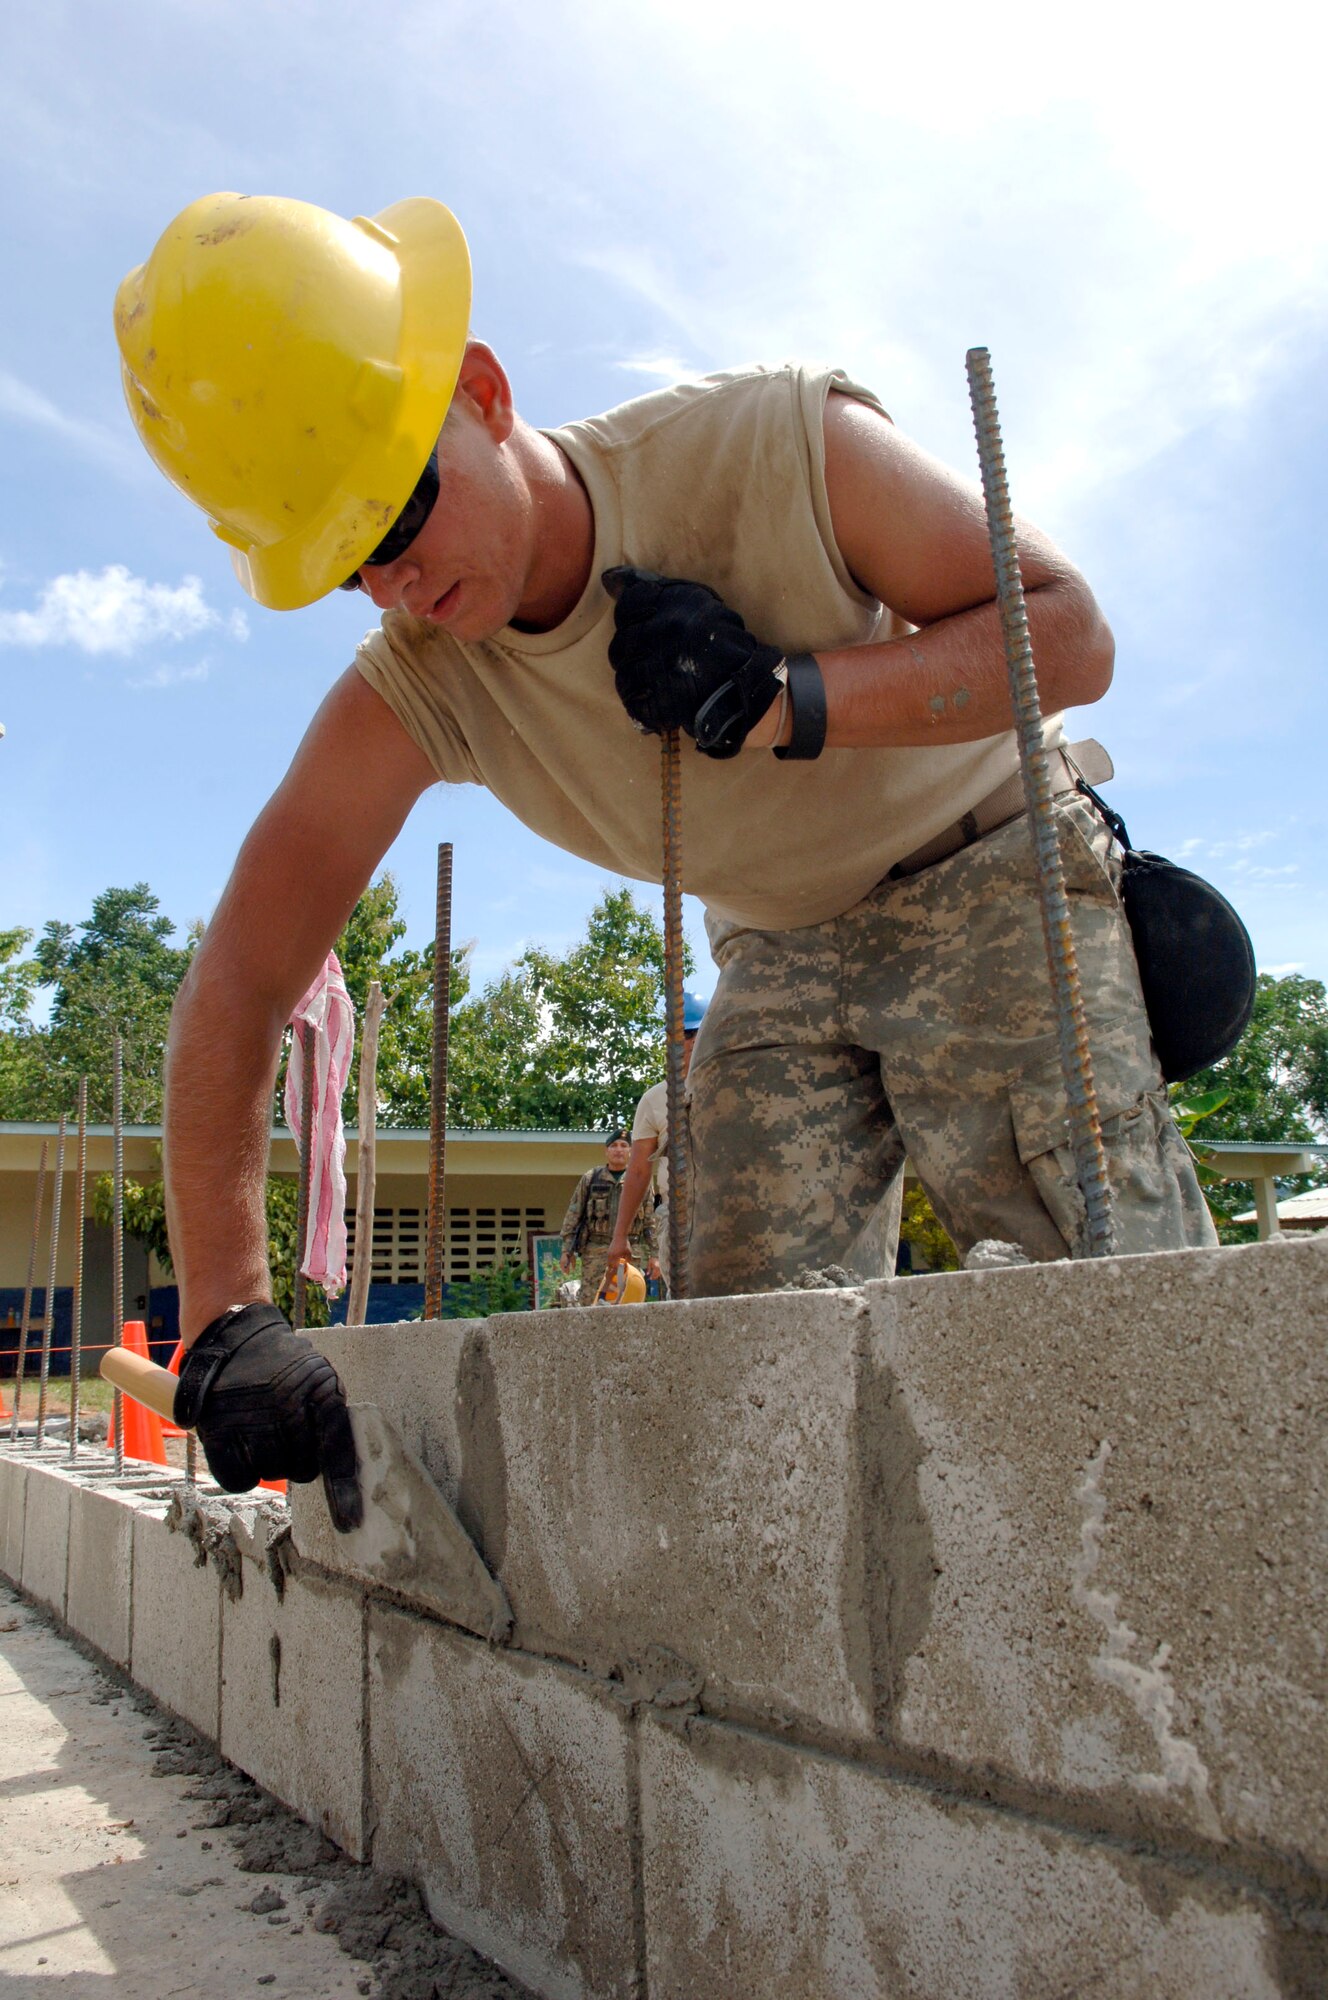 Spc. Michael Wiken, construction engineer with the 372nd Engineer Company, uses mortar on the first layer of bricks June 26 at Santa Librada elementary school in Panama. The Army Reservists are deployed in support of New Horizons Panama 2010, a humanitarian assistance mission designed to strengthen partnerships between the United States and Panama. (U.S. Air Force photo/Tech. Sgt. Eric Petosky)